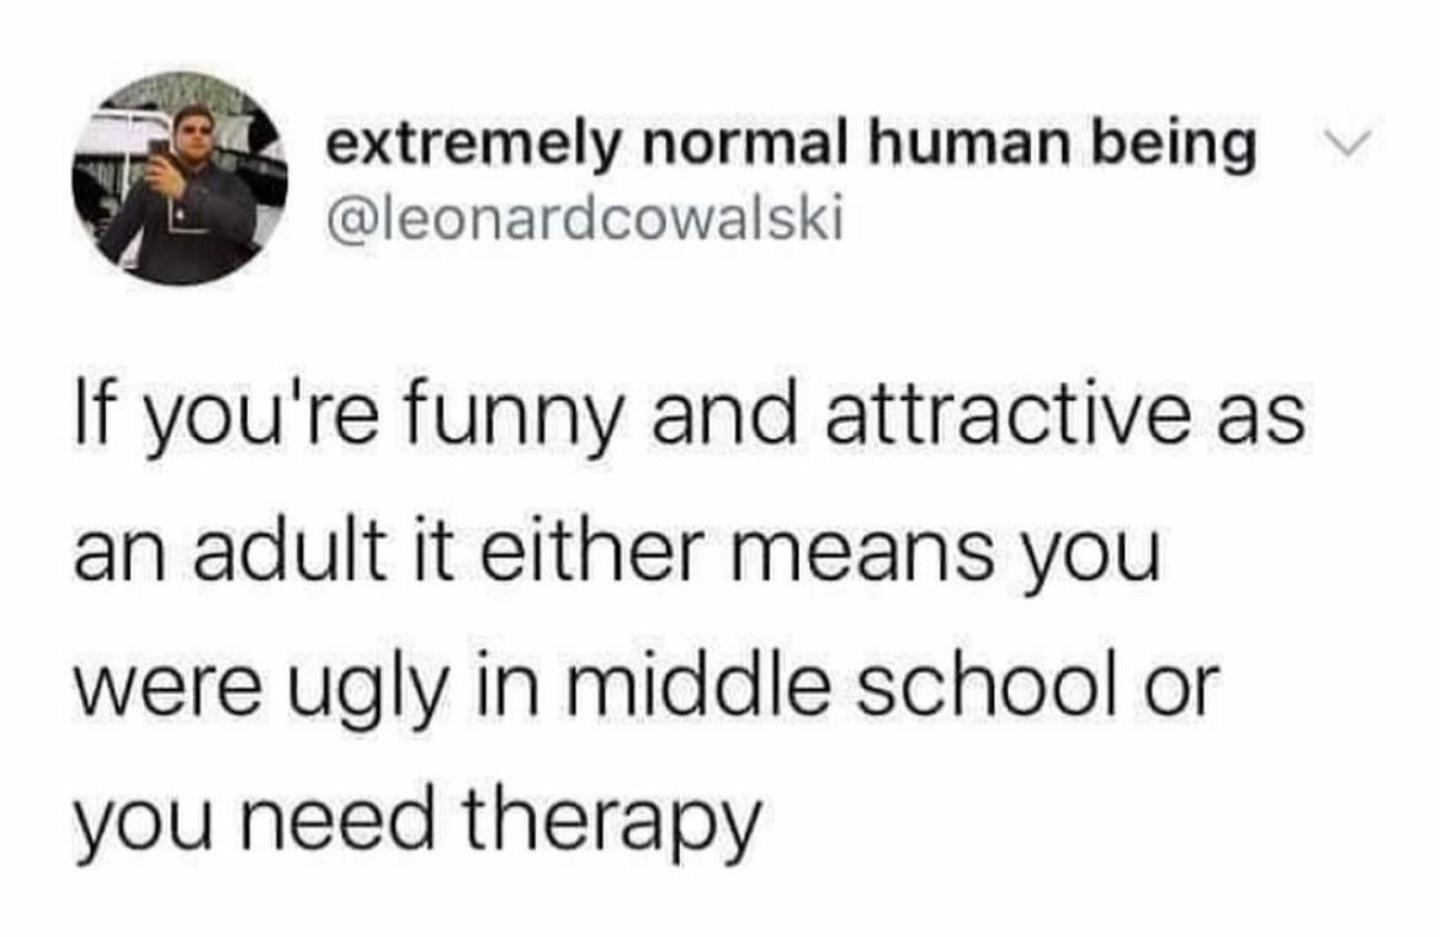 diagram - extremely normal human being If you're funny and attractive as an adult it either means you were ugly in middle school or you need therapy